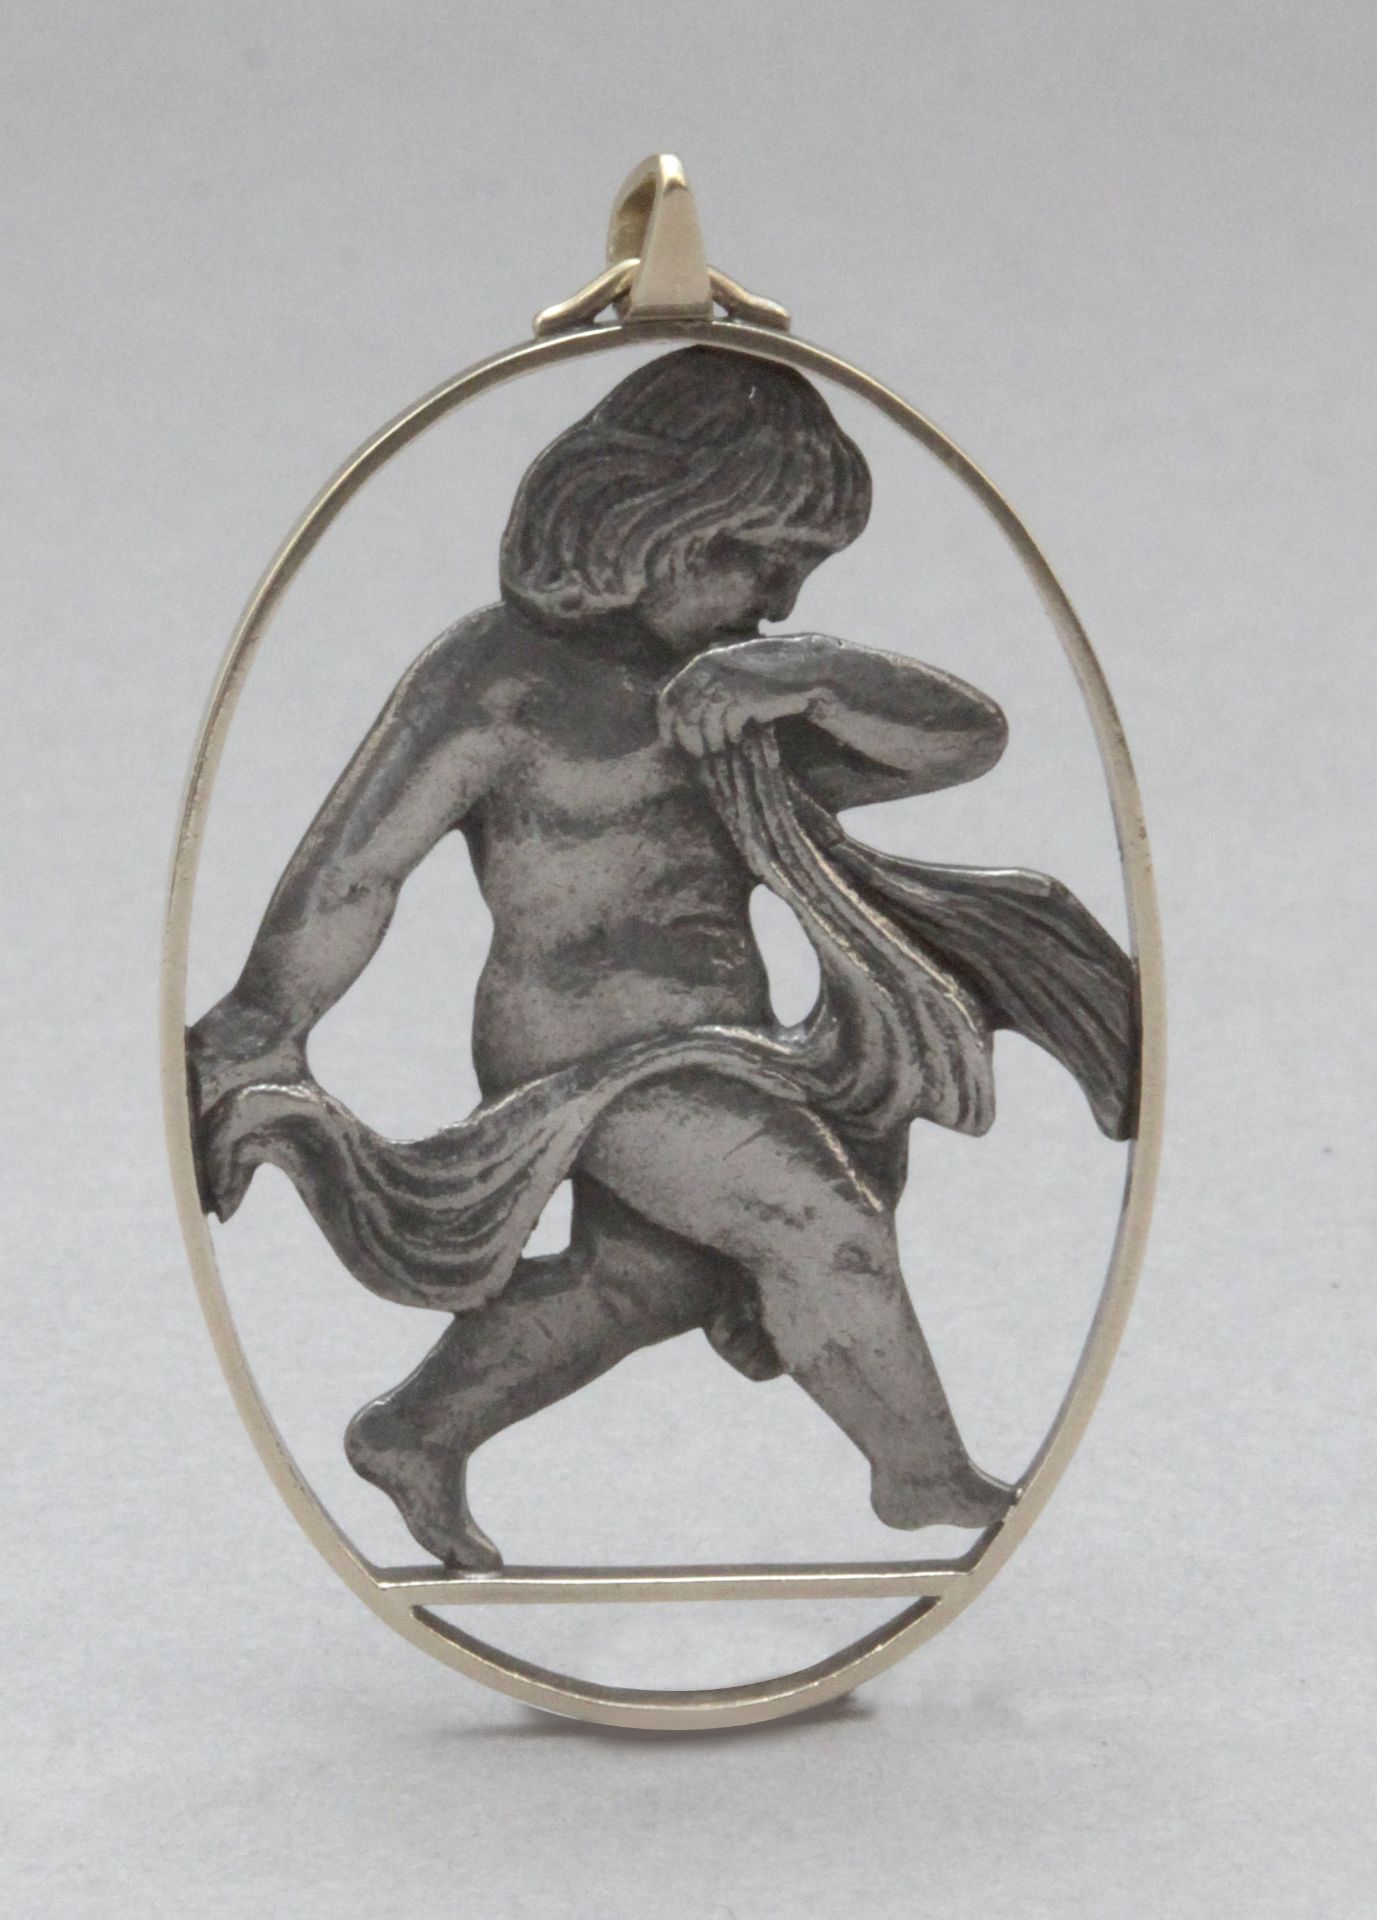 A 20th century silver and gold pendant - Image 3 of 3